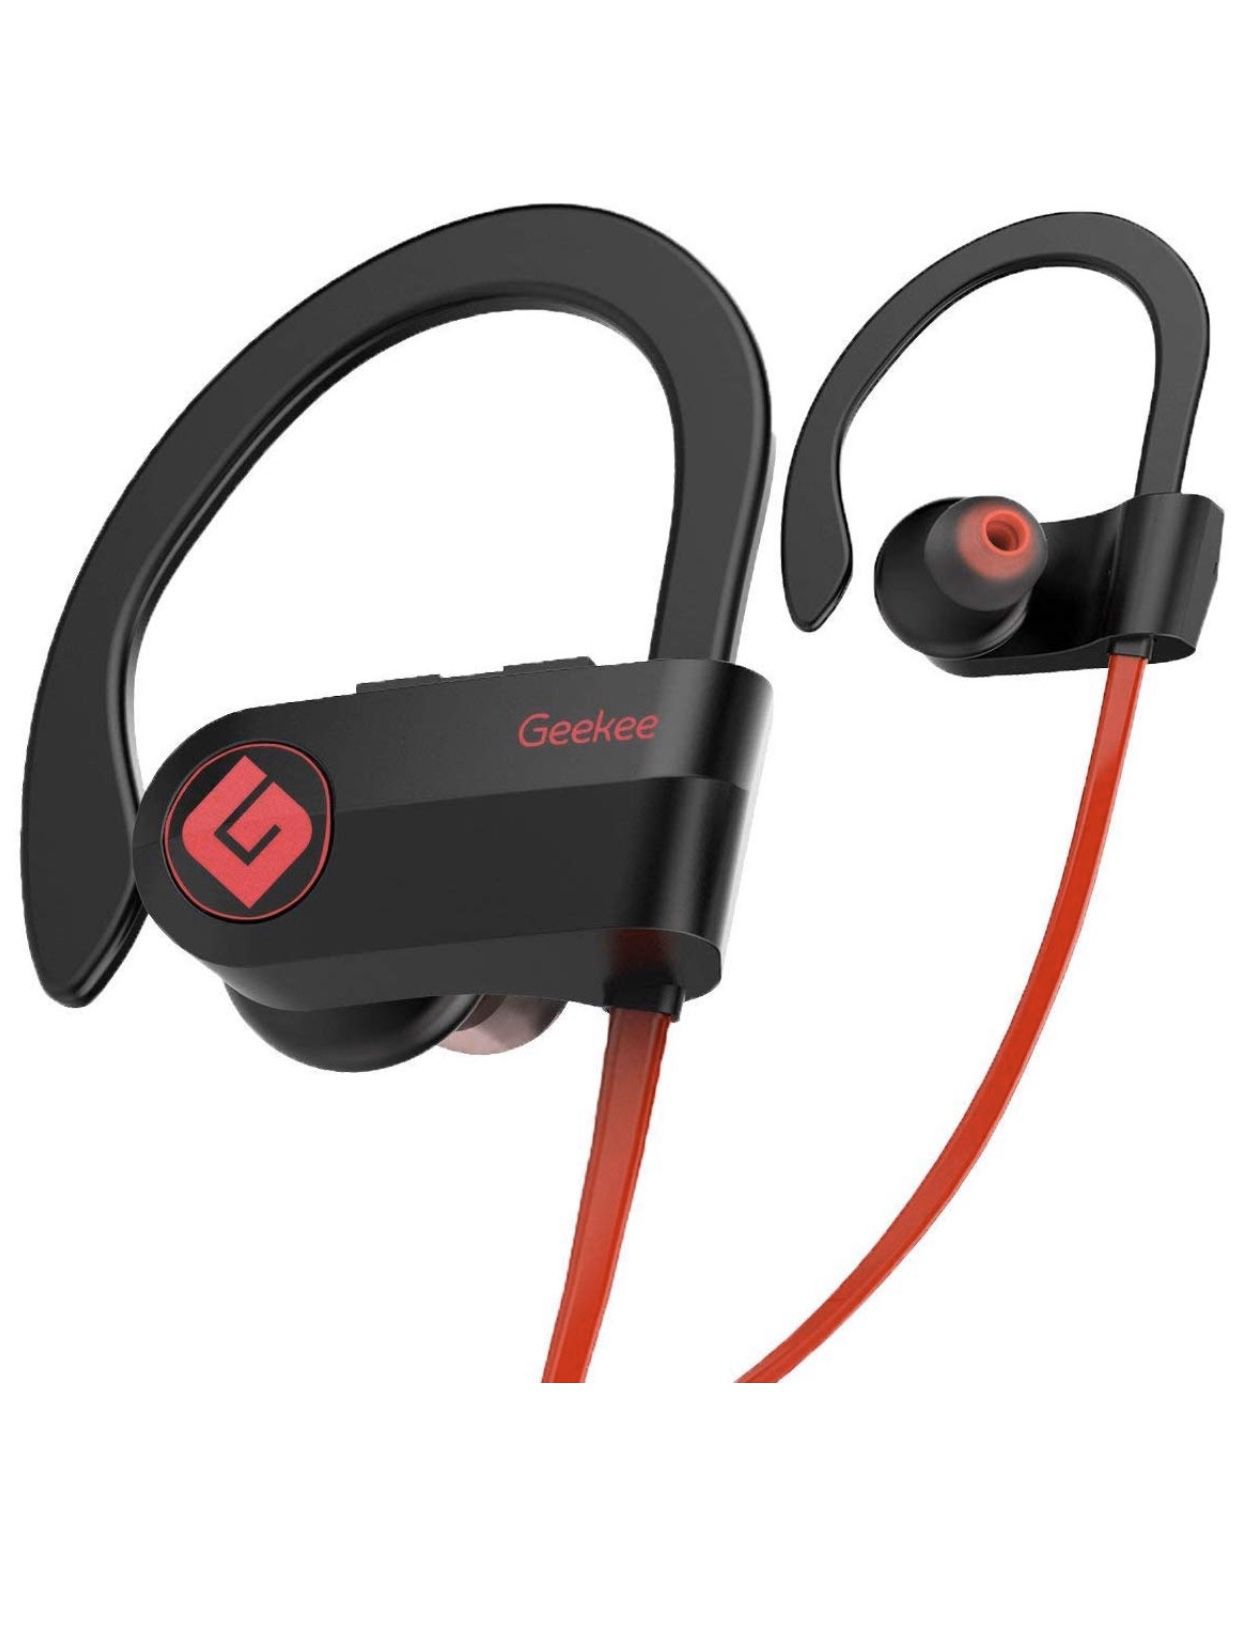 Wireless Bluetooth Headphones Waterproof IPX7, Best Sport in Ear Earbuds Earphones w/Remote and Mic HiFi Stereo Richer Bass, 9 Hrs Playback Noise Can